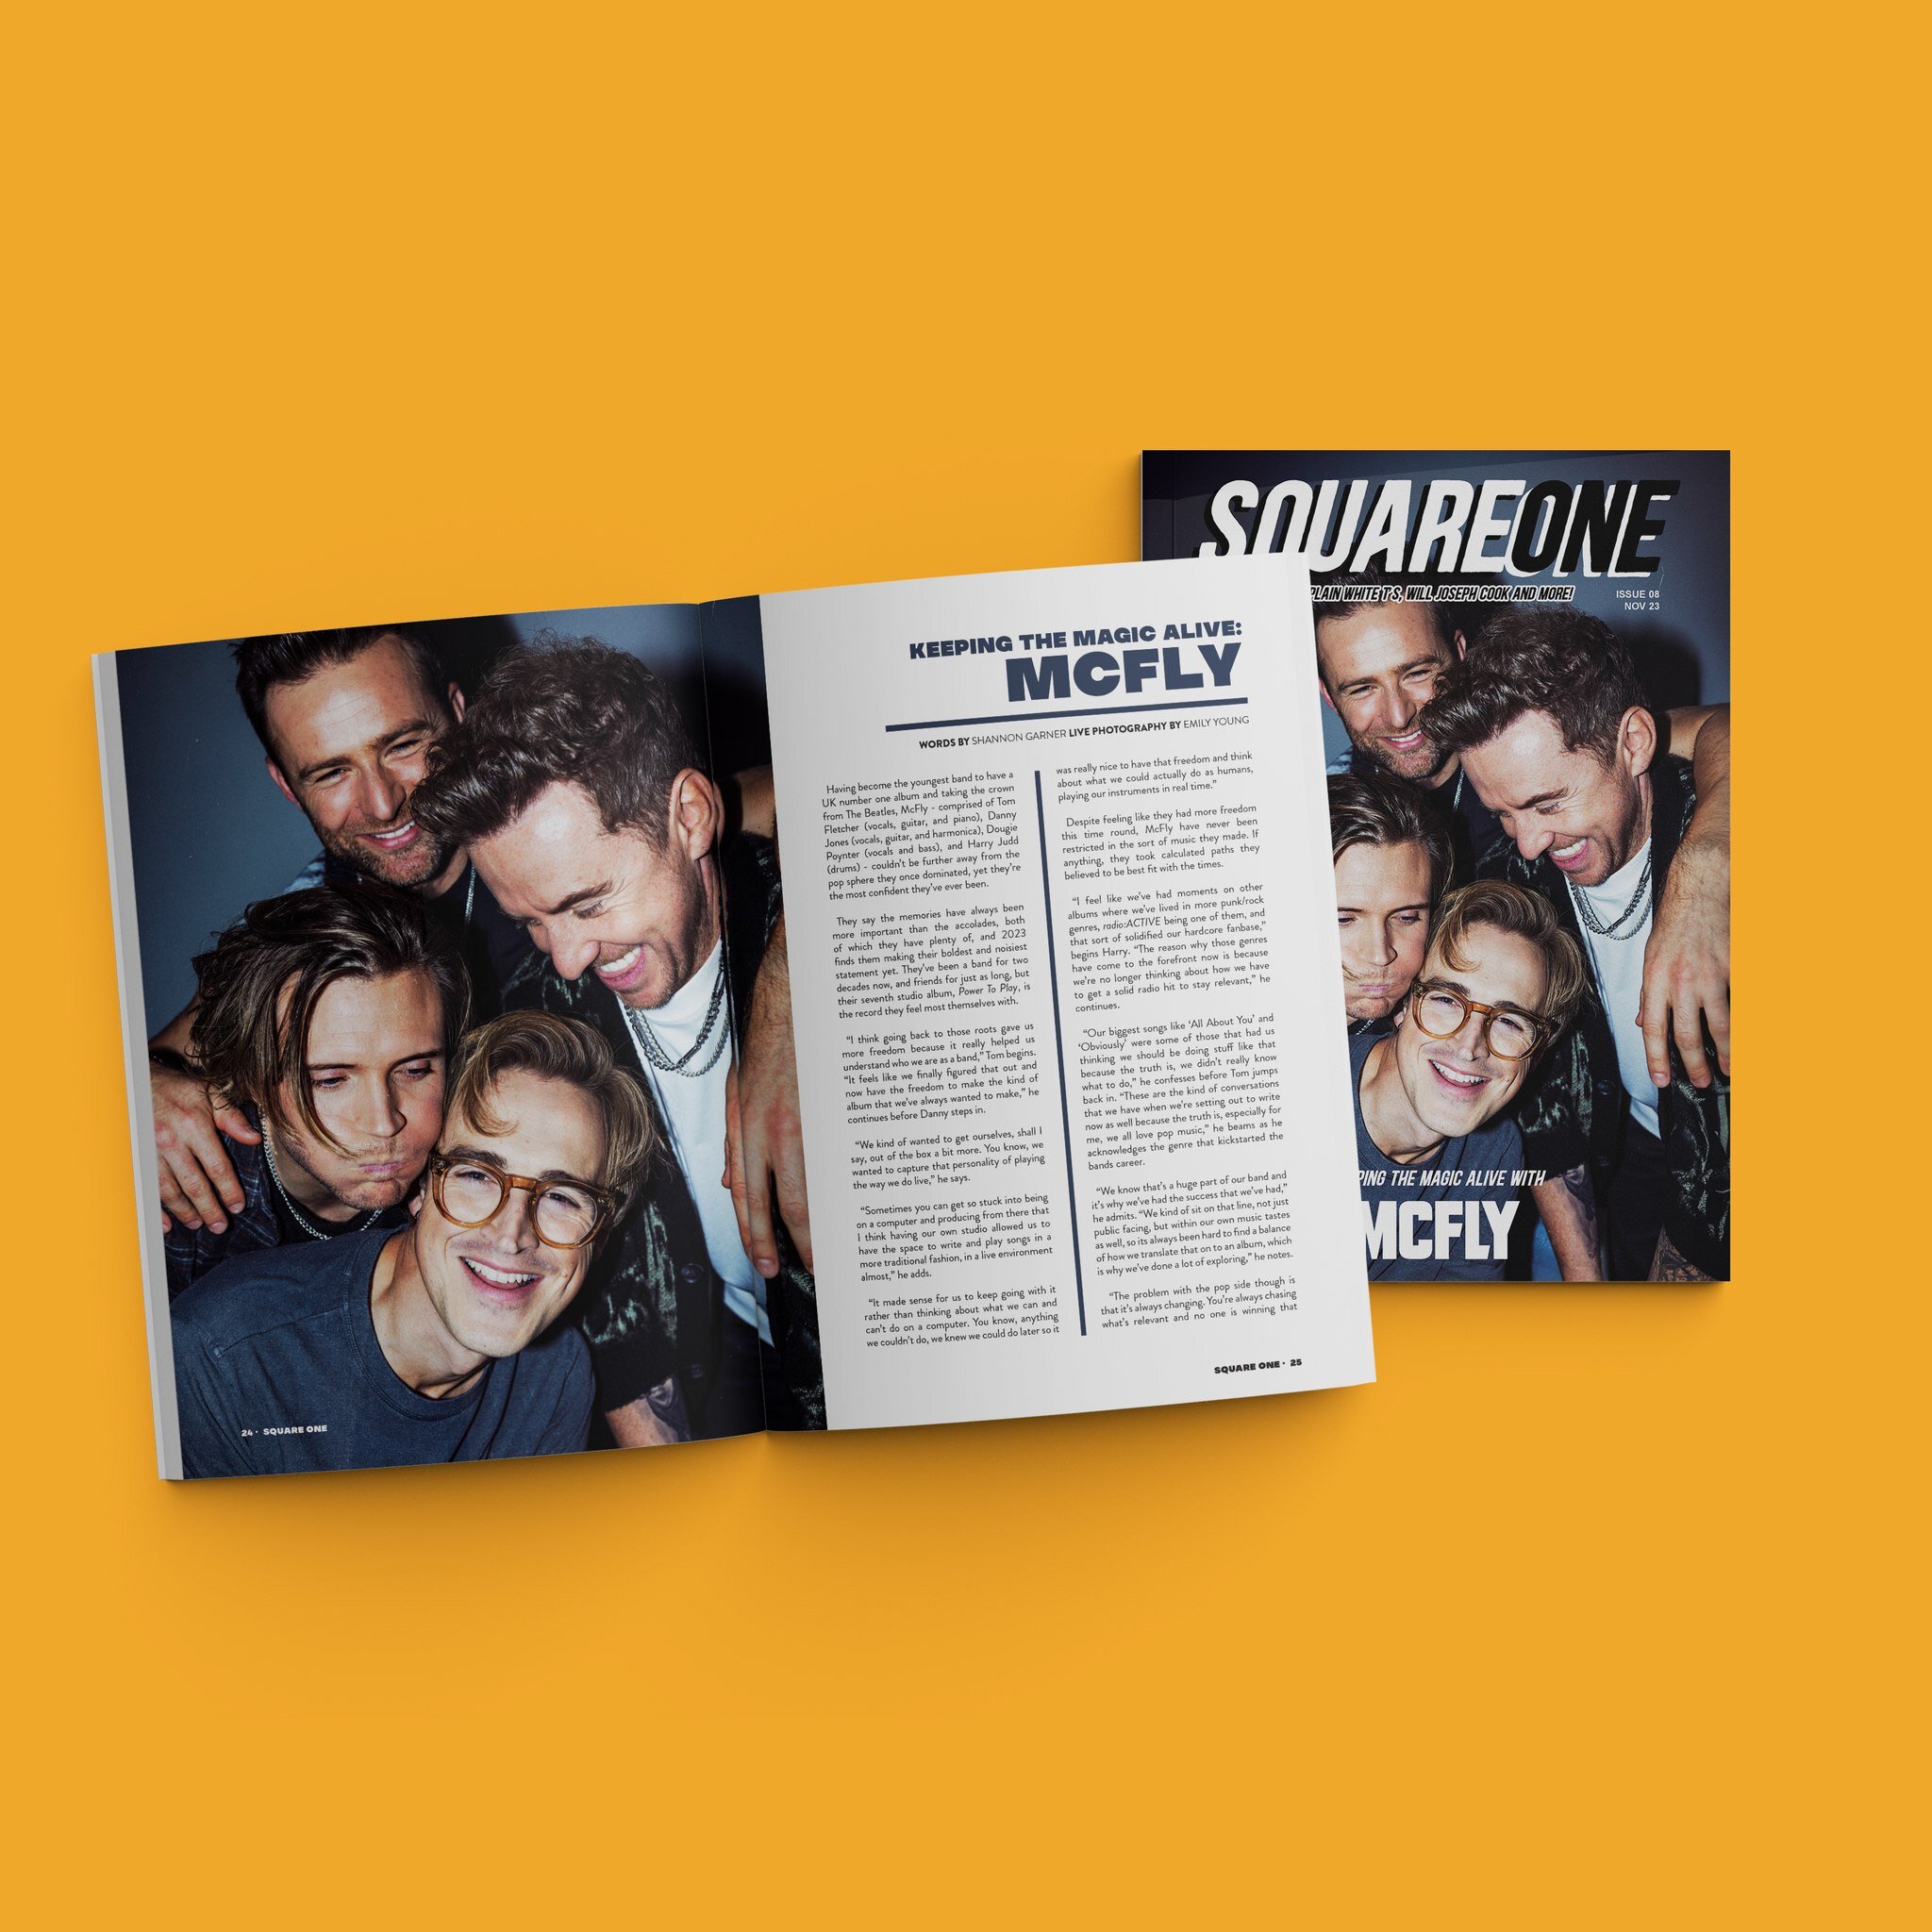 ISSUE 8 IS OUT NOW! ✨ we find out how @mcflymusic keep the magic alive, as well as have great chats with @heyviolet, @catecanning, @plainwhitets, @willjosephcook, @harrymarshallmusic + more! 

Read online for free, purchase a physical copy or a poste